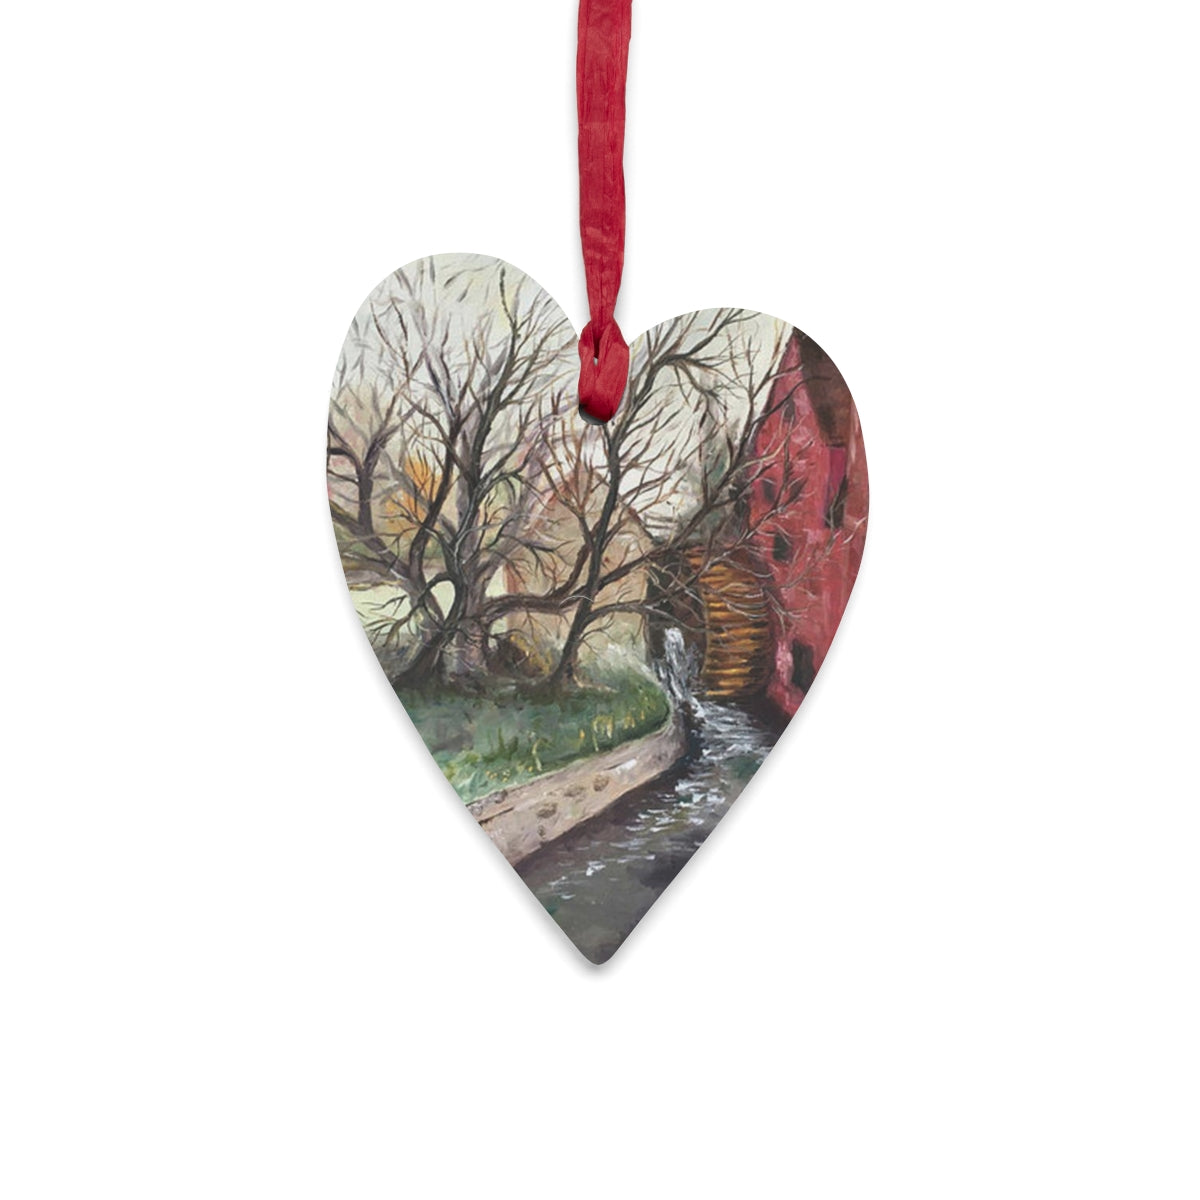 The Old Mill Cotswolds Heart shaped Wooden Ornament